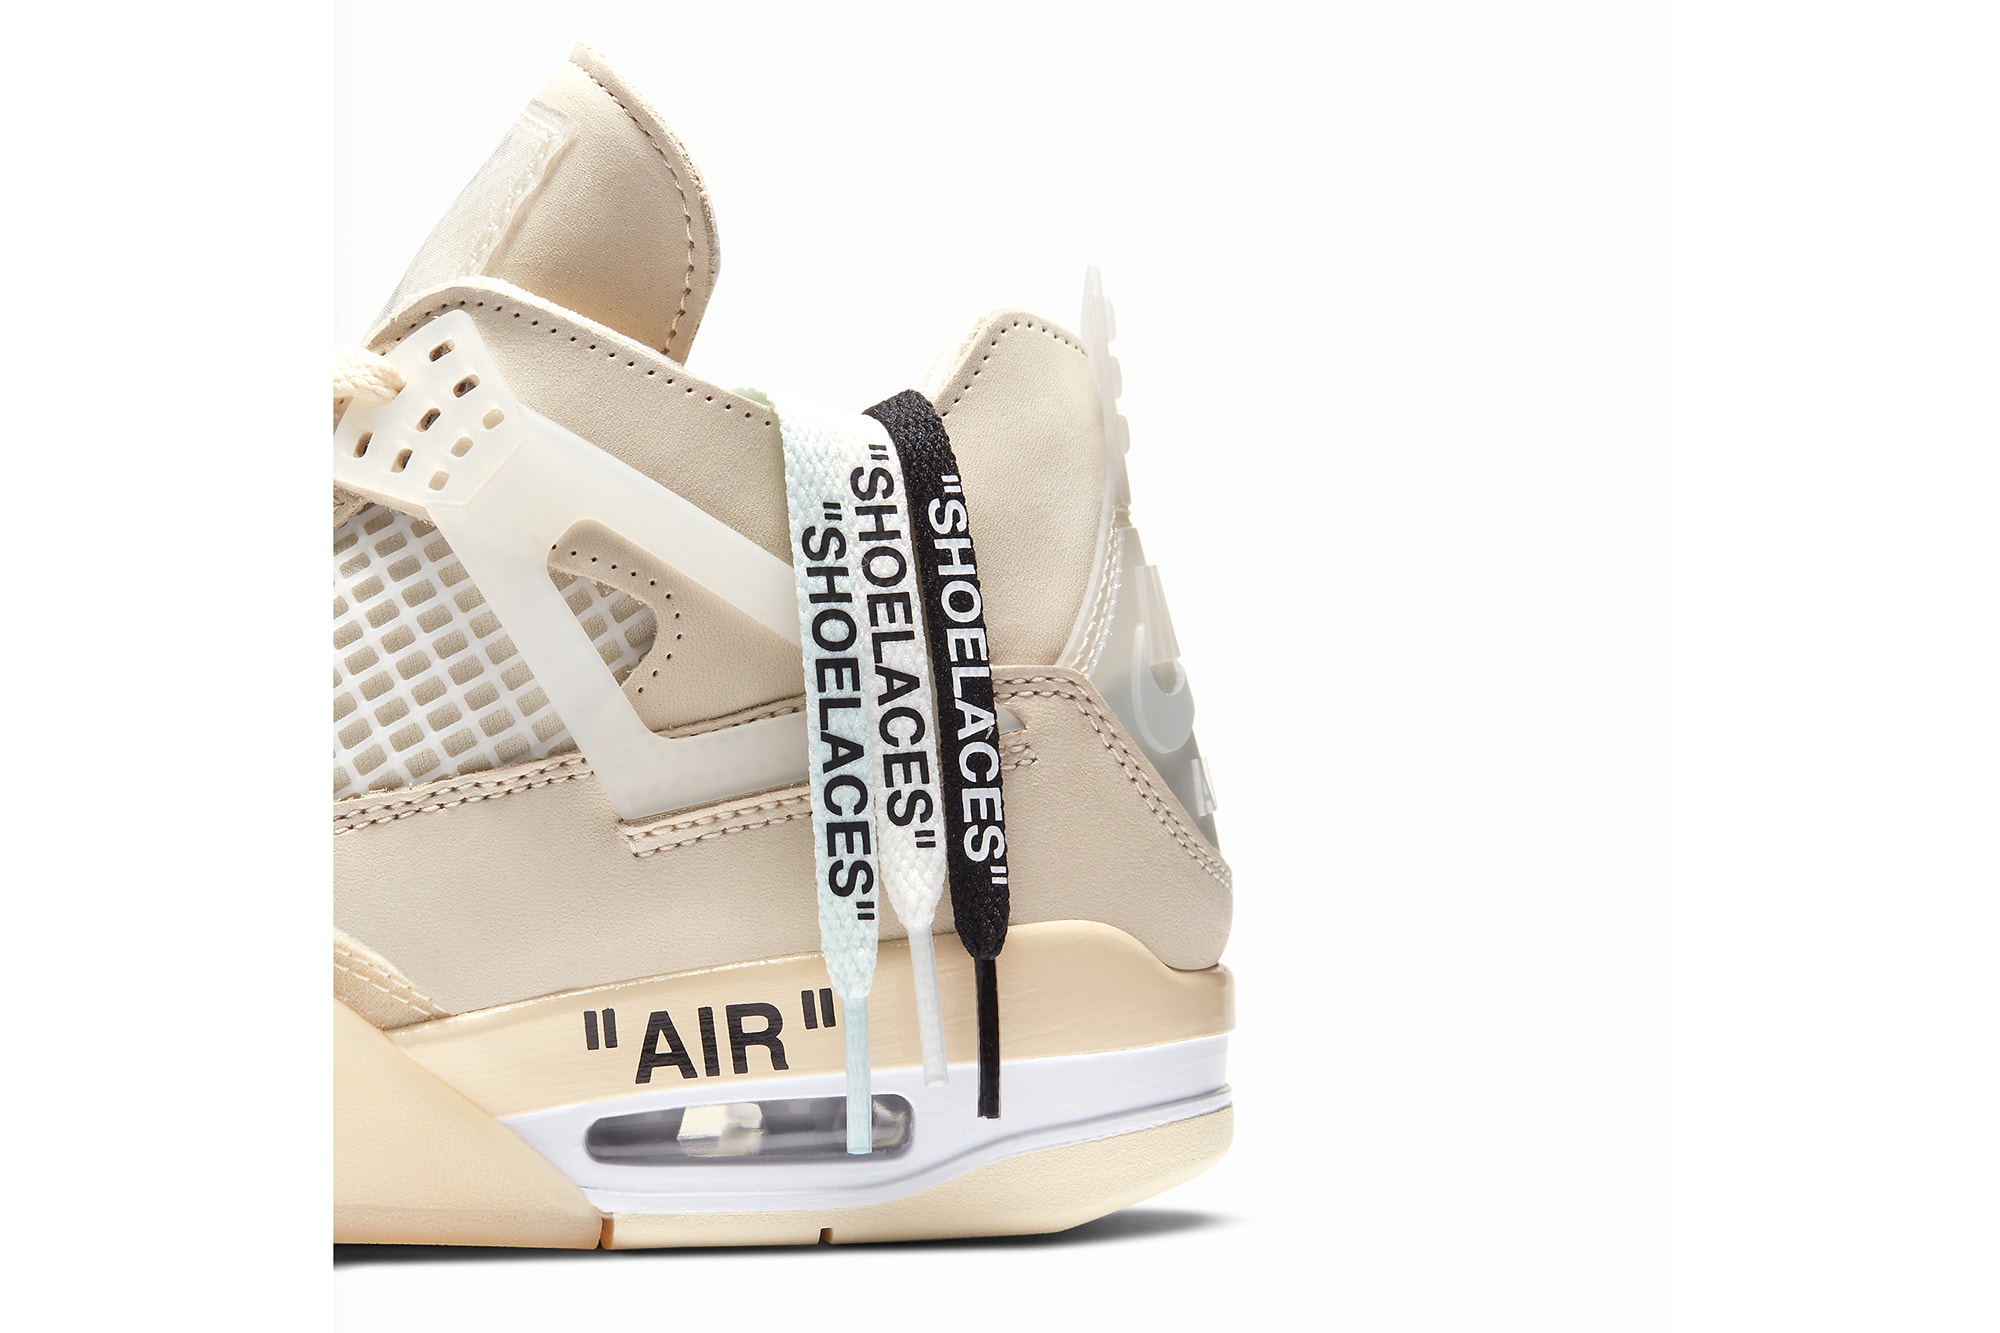 The Off-White x Air Jordan 4 WMNS “Sail” is releasing this Saturday -  YOMZANSI. Documenting THE CULTURE